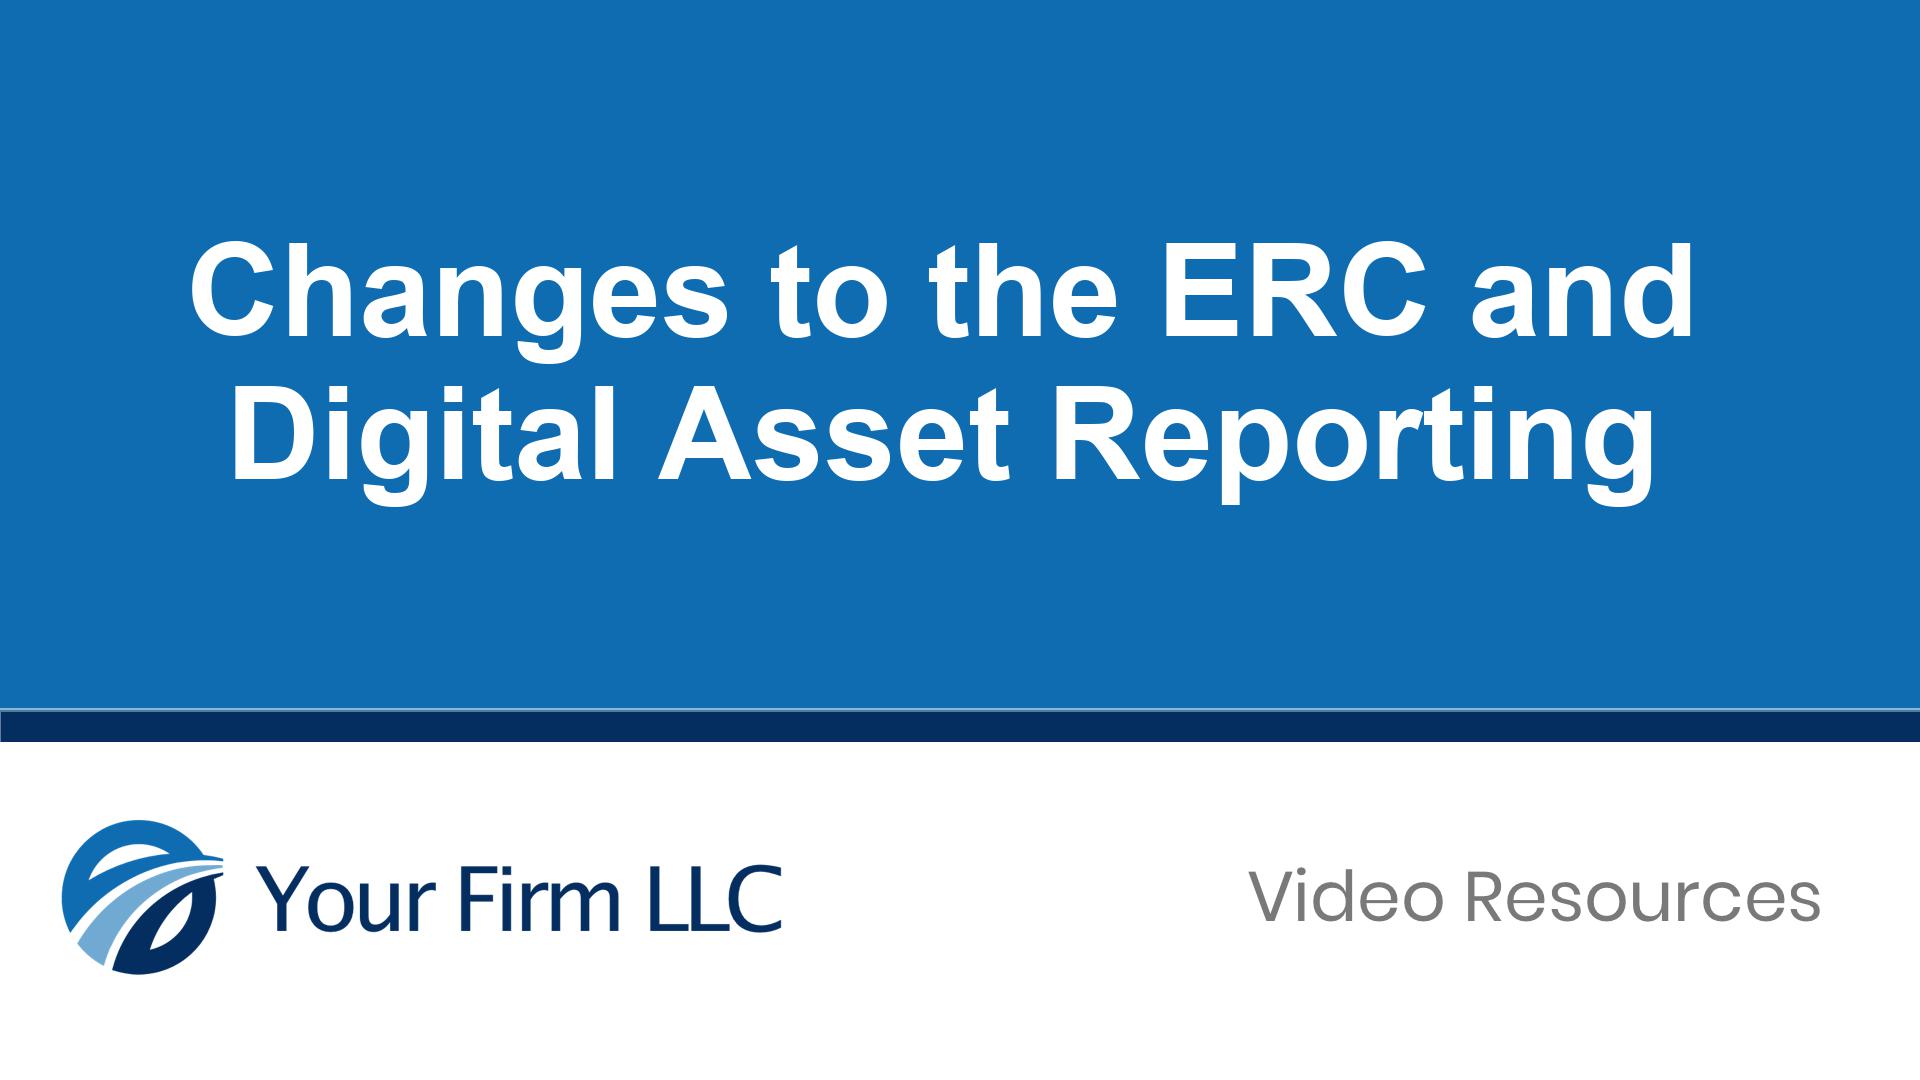 Changes to the ERC and Digital Asset Reporting